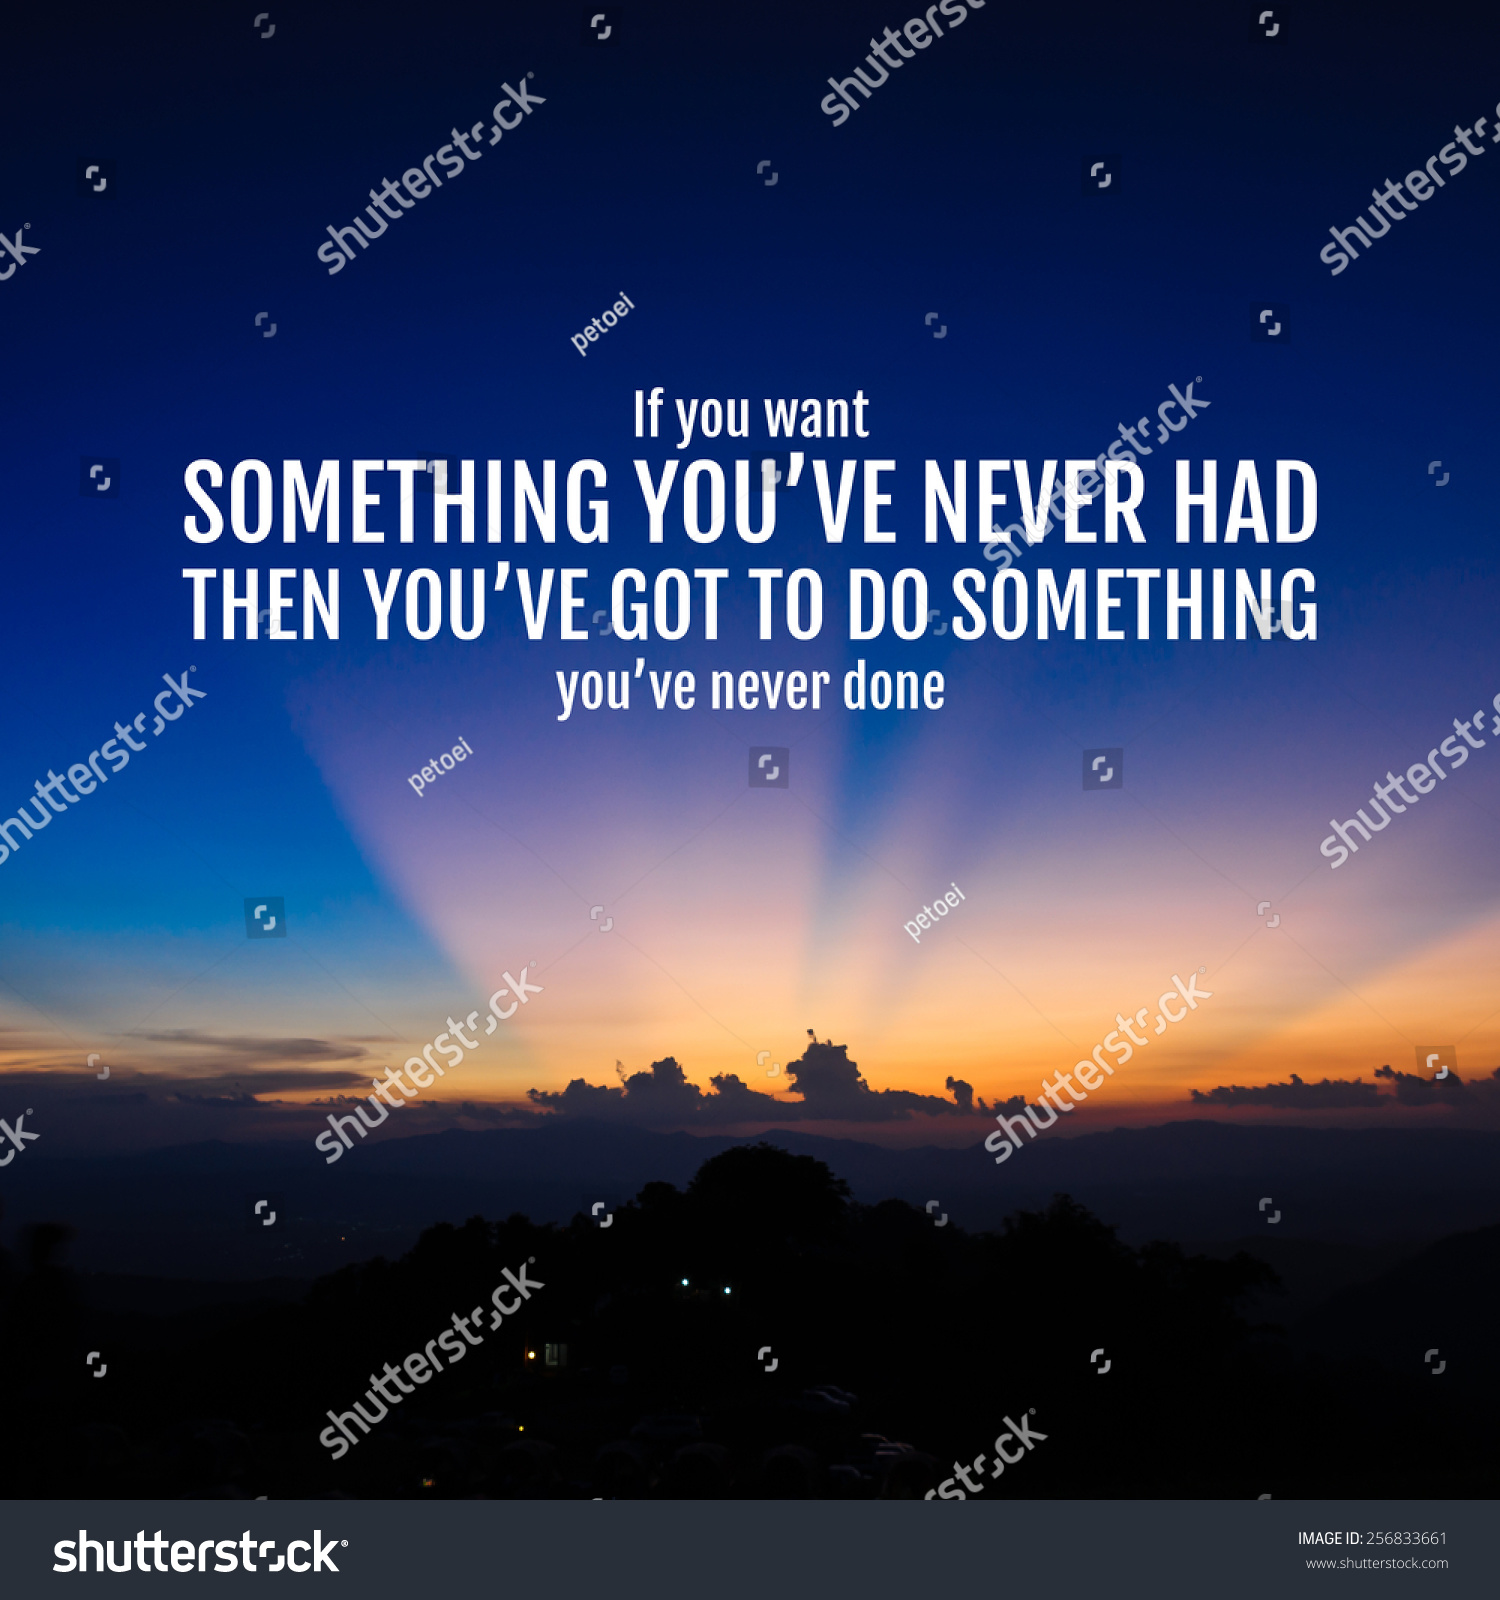 Inspirational quote by unknown source on vintage blue sky and light cloud mountain background #256833661